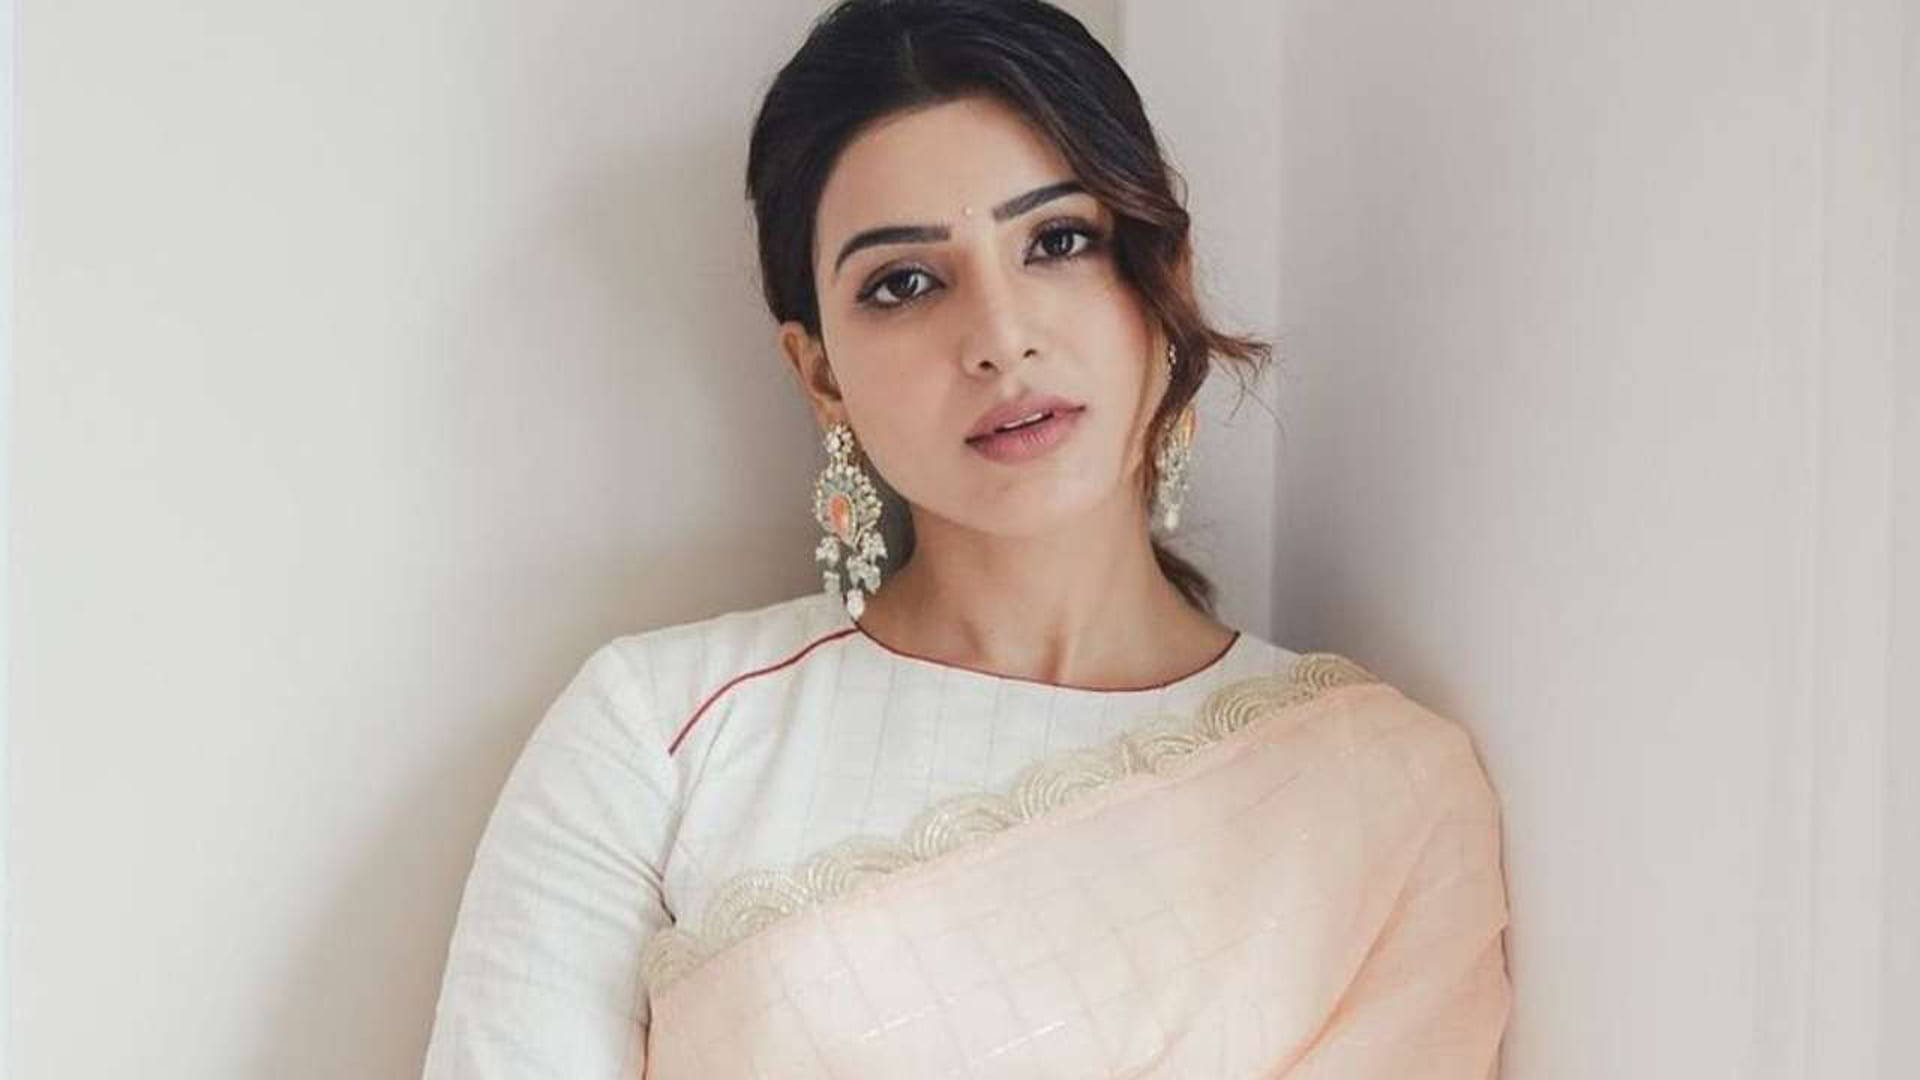 Samantha Saree Leaning Against Wall Background